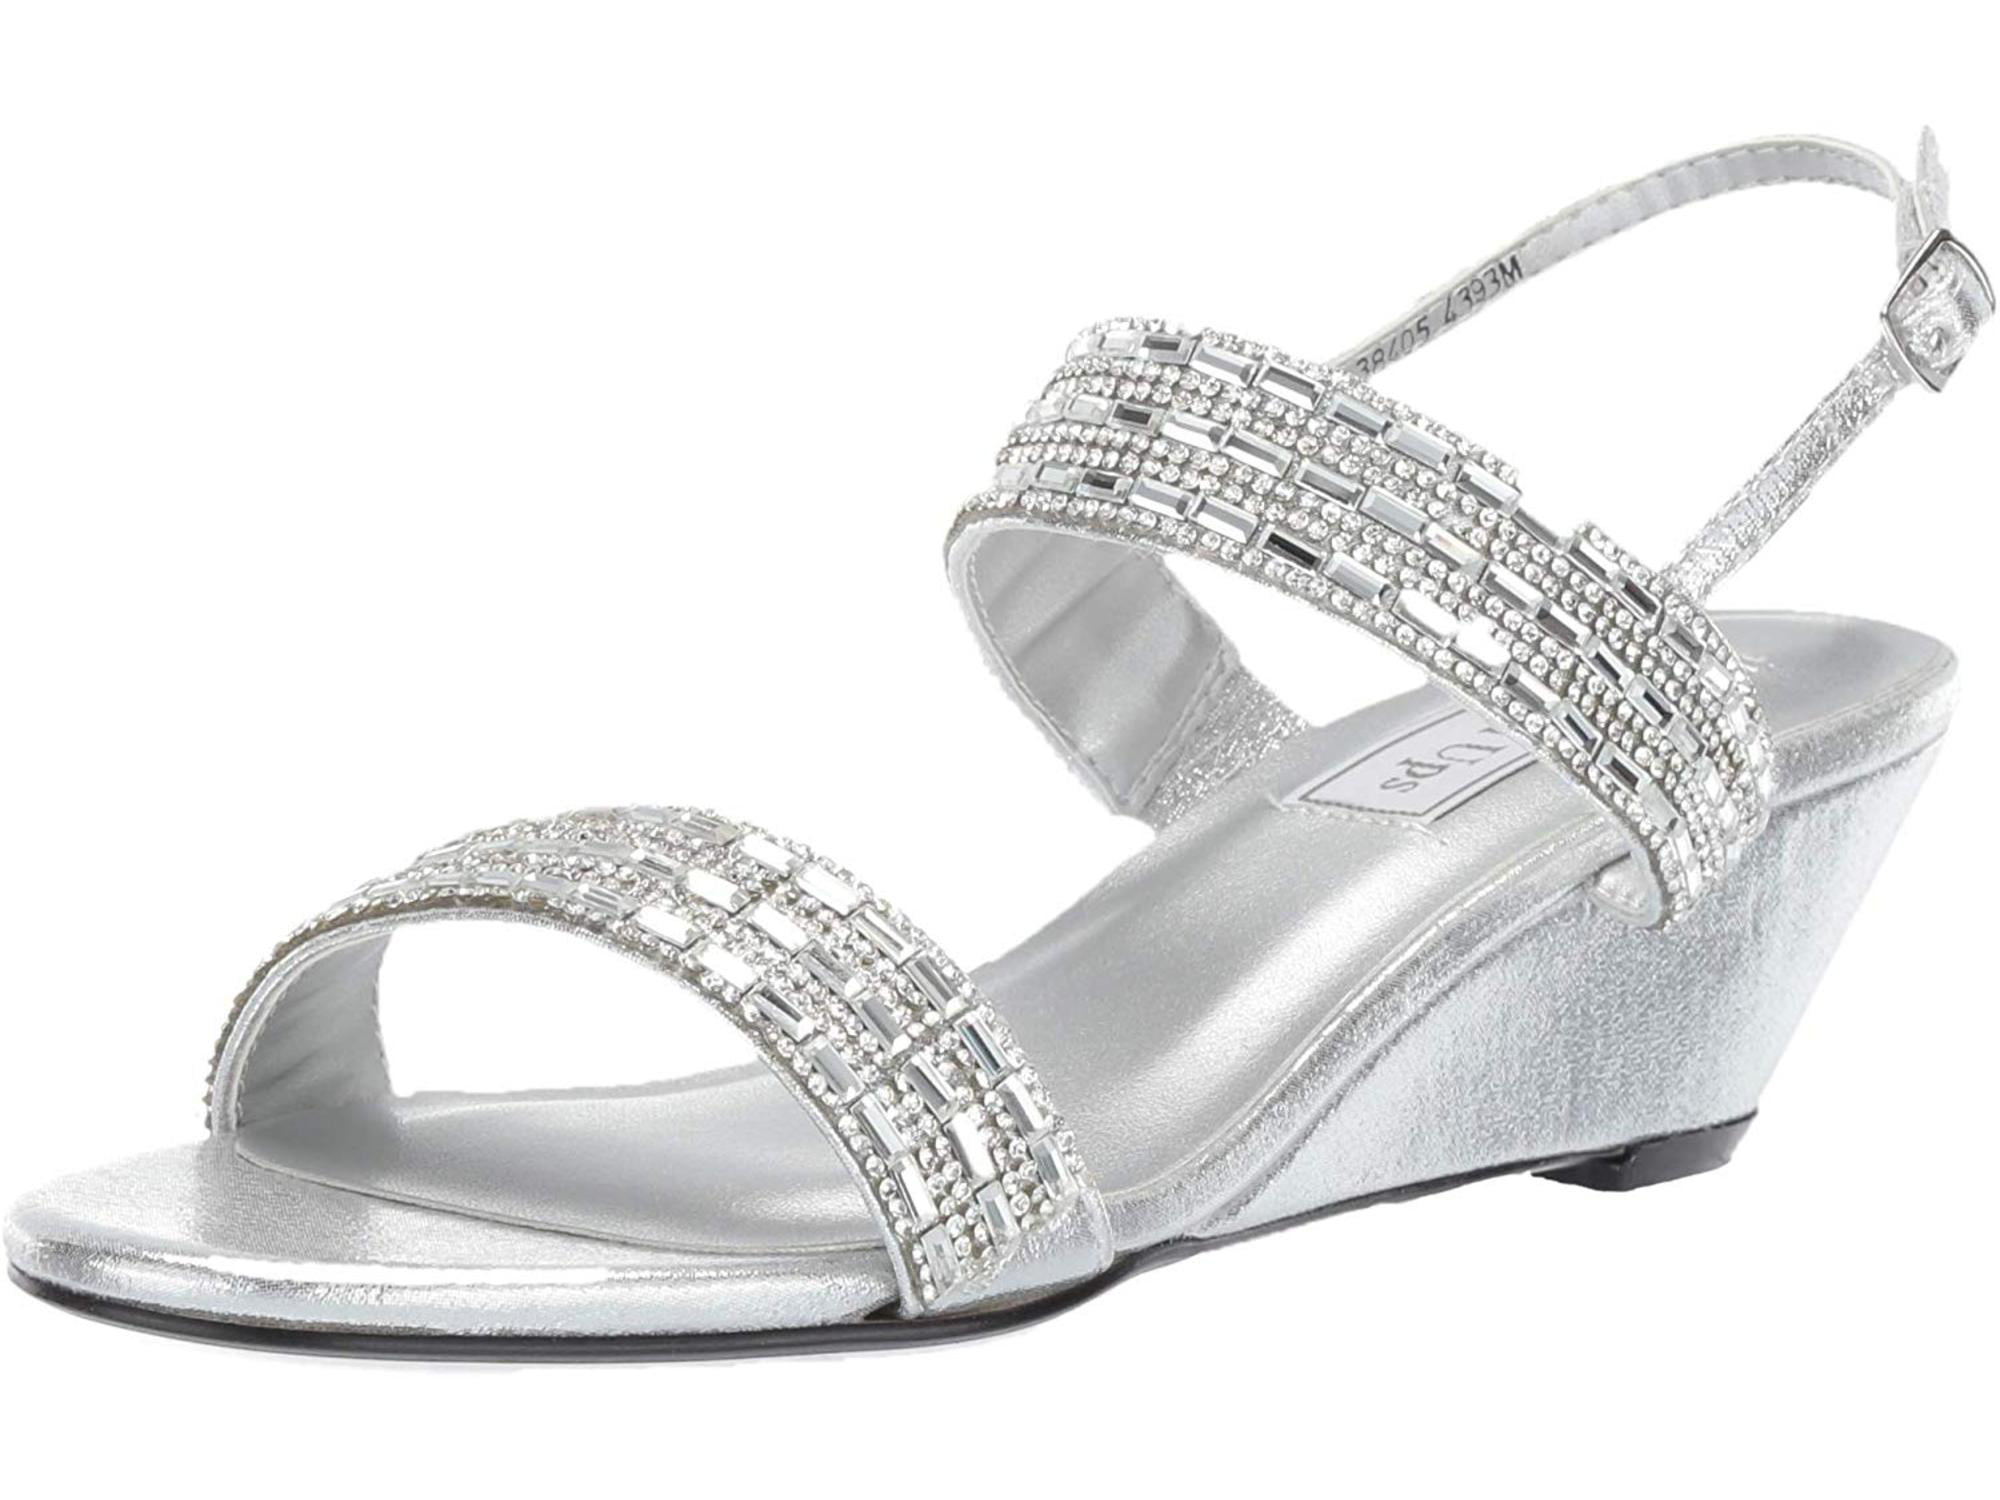 Touch Ups - Touch Ups Women's Allison Wedge Sandal, Silver, Size 11.0 ...